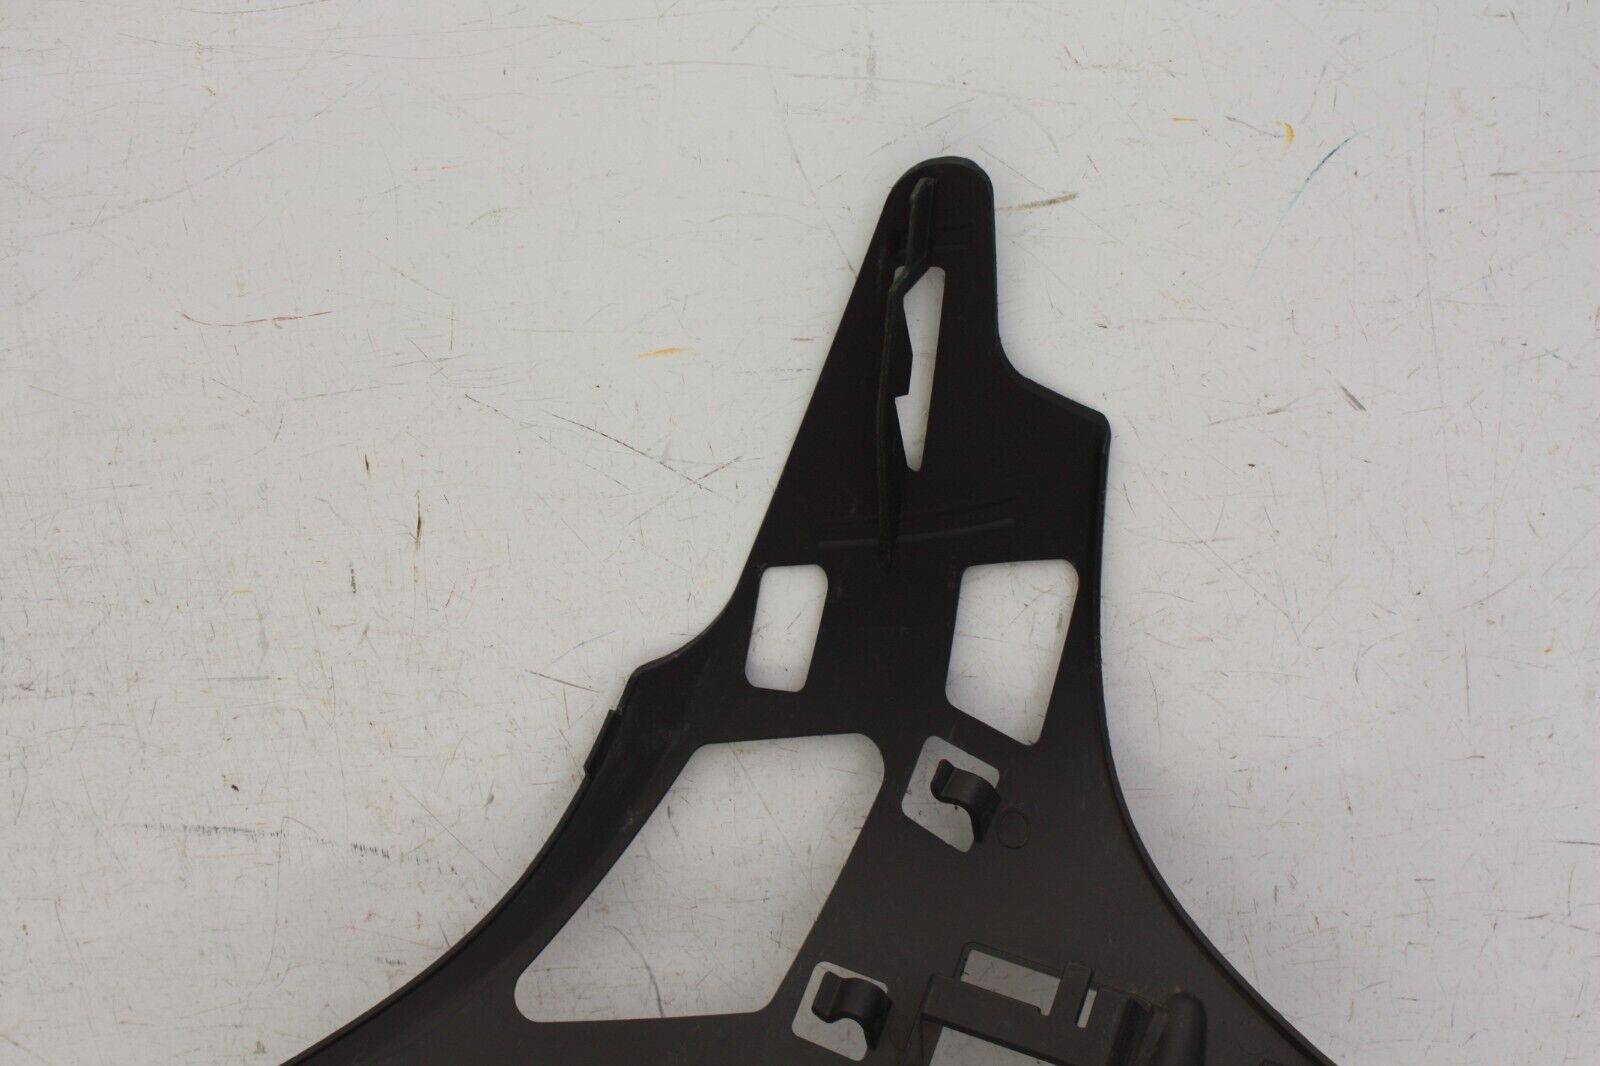 Mercedes-S-Class-W222-AMG-Front-Bumper-Left-Bracket-2017-TO-2021-A2228856800-176352019956-11